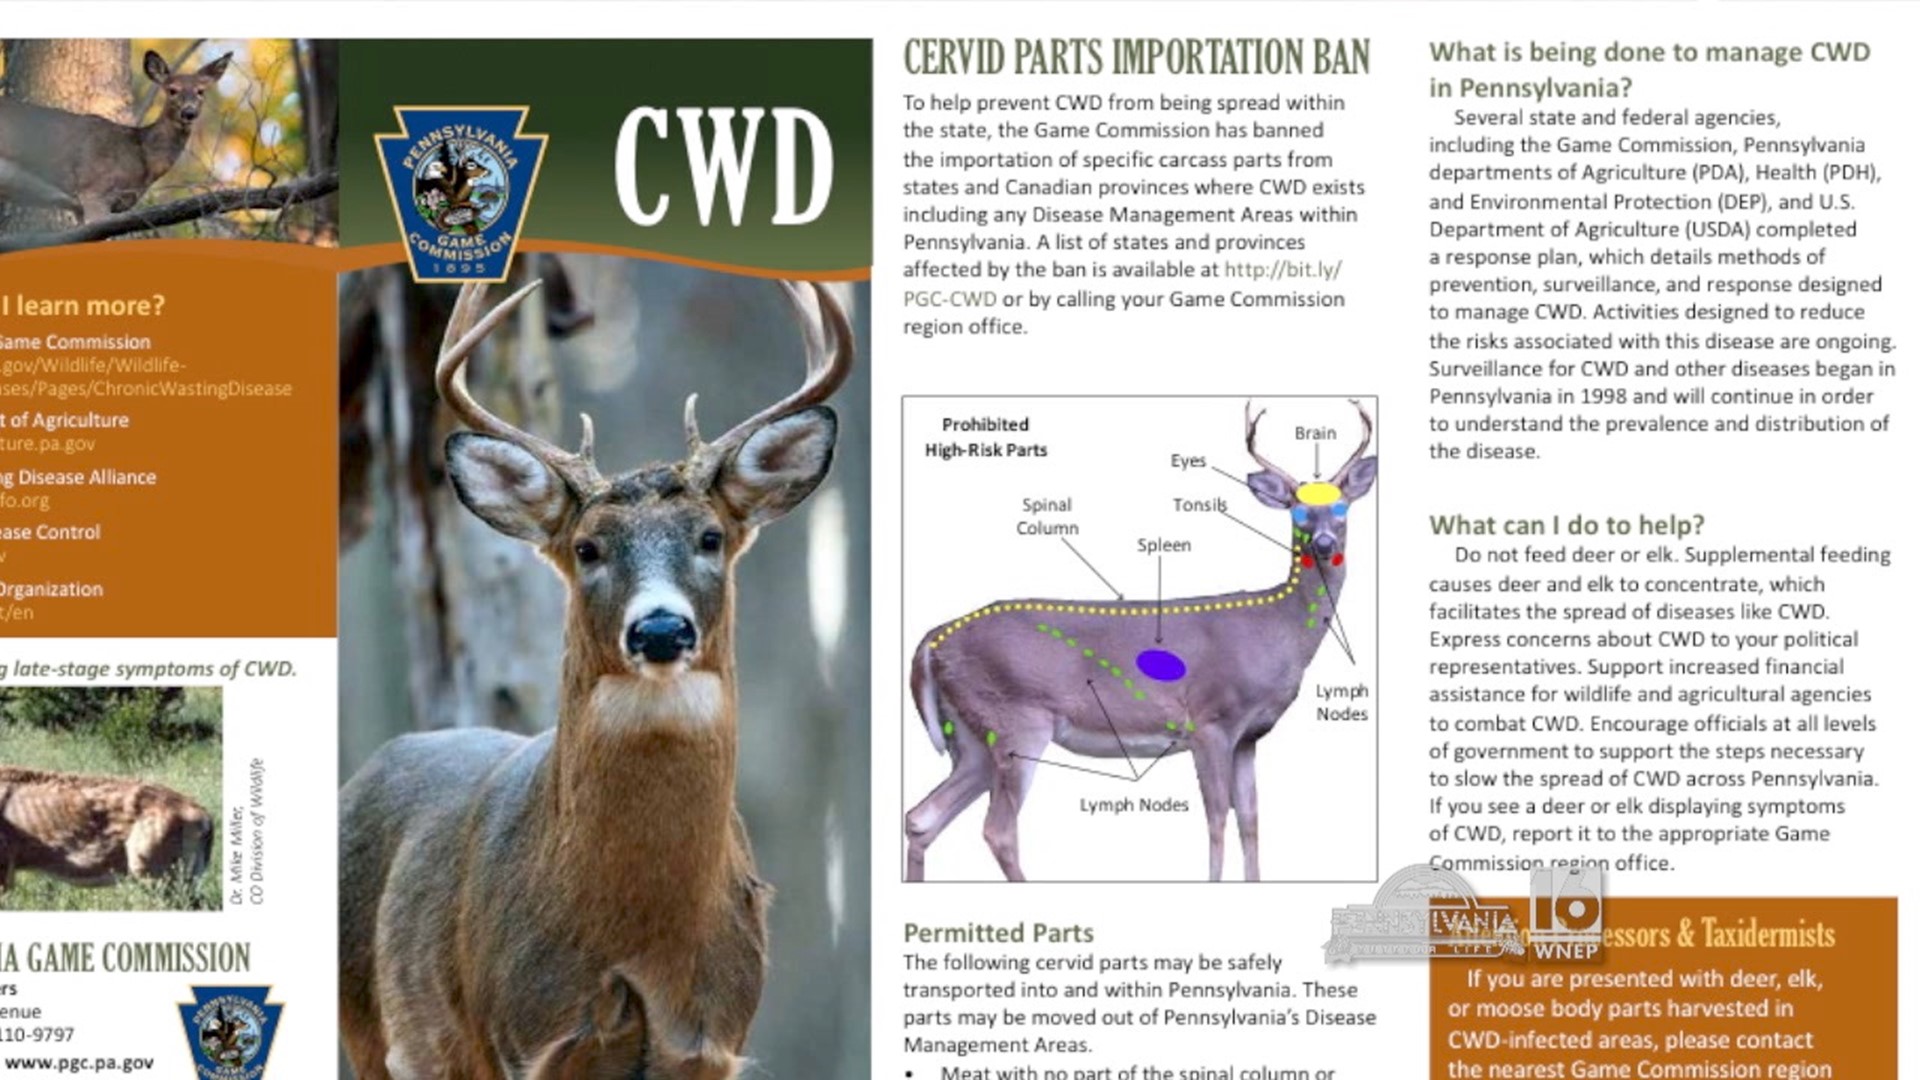 Learn the steps to prevent the spread of CWD.